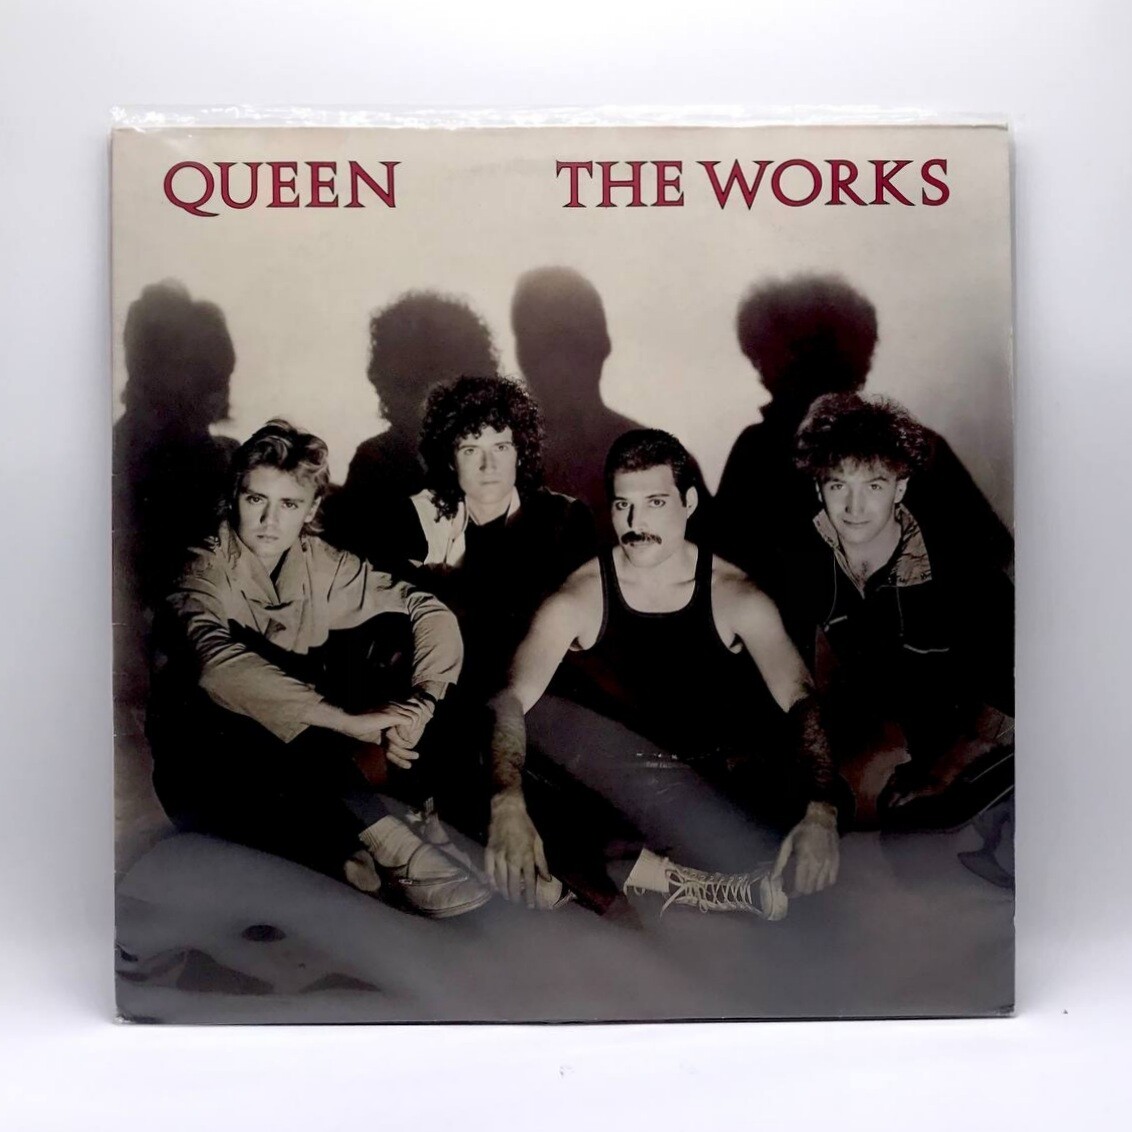 [USED] QUEEN -THE WORKS- LP